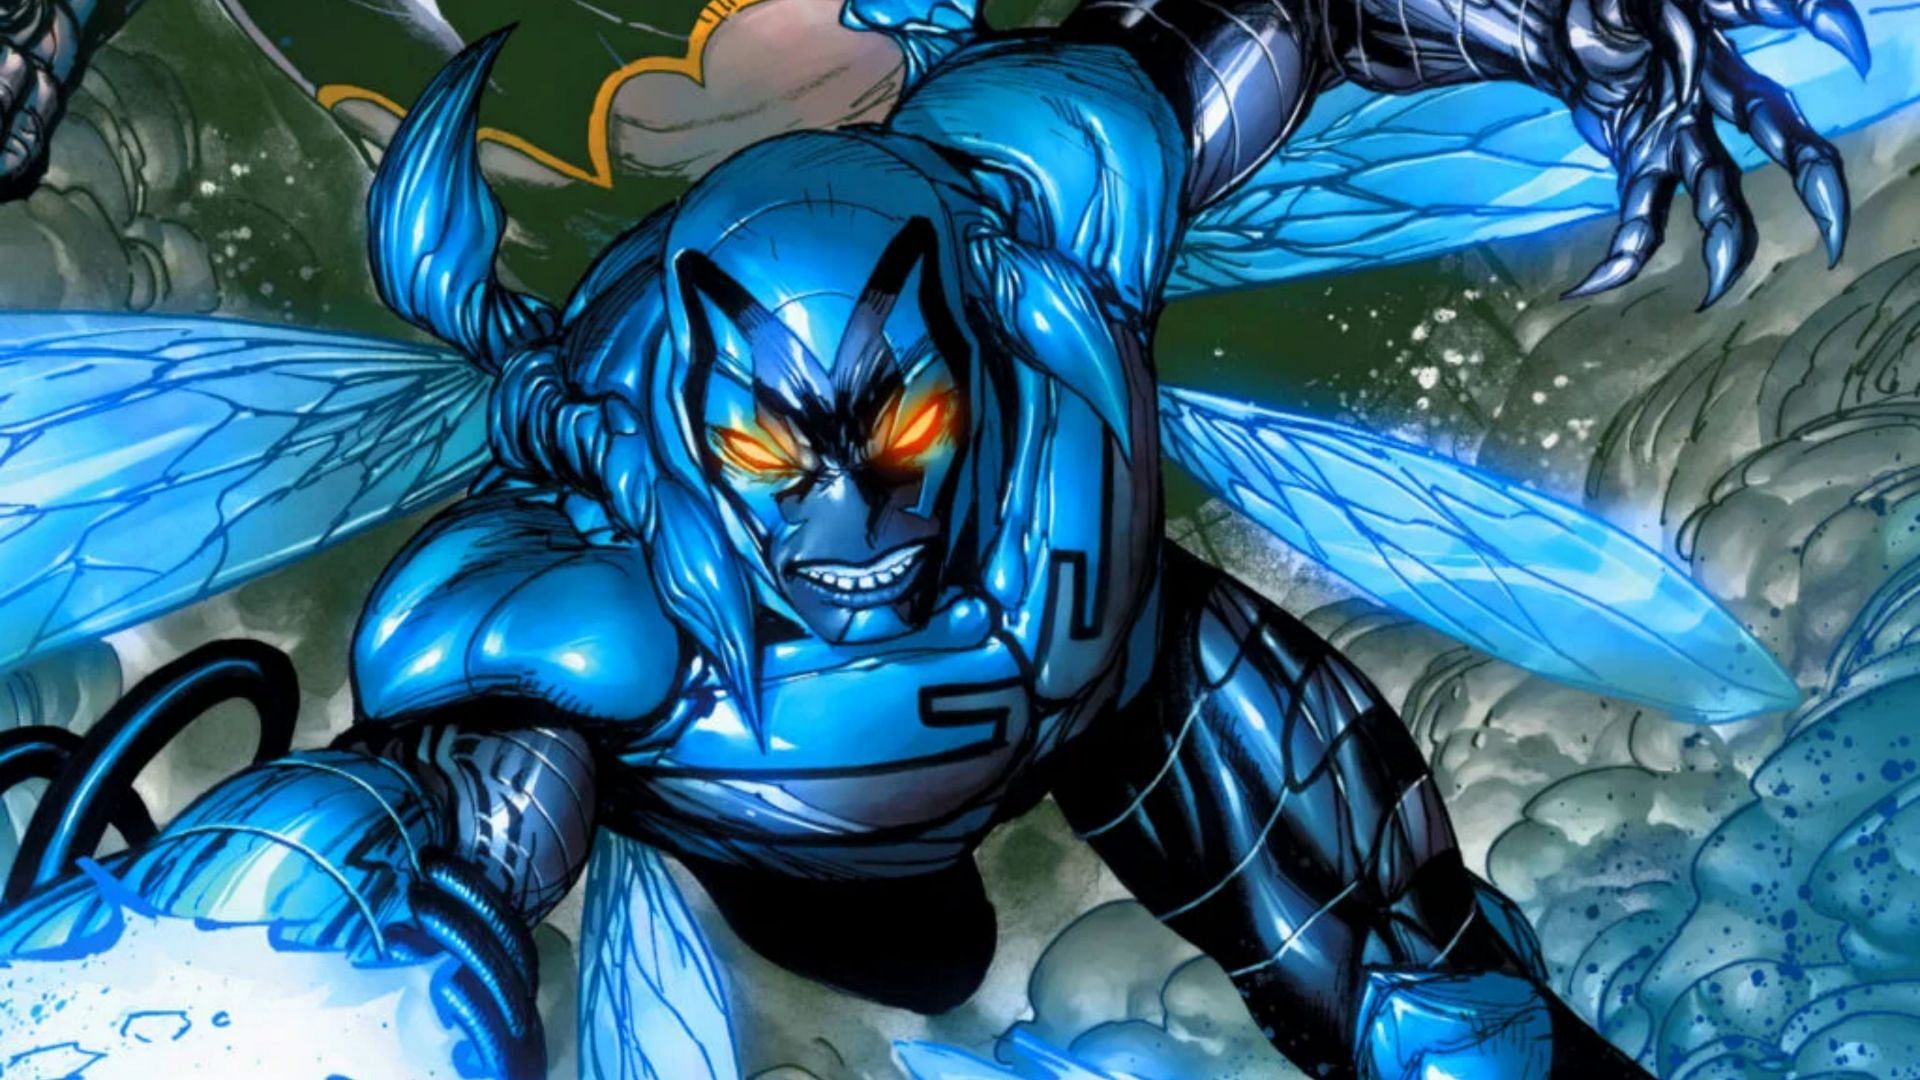 The 5 best Blue Beetle stories, ranked